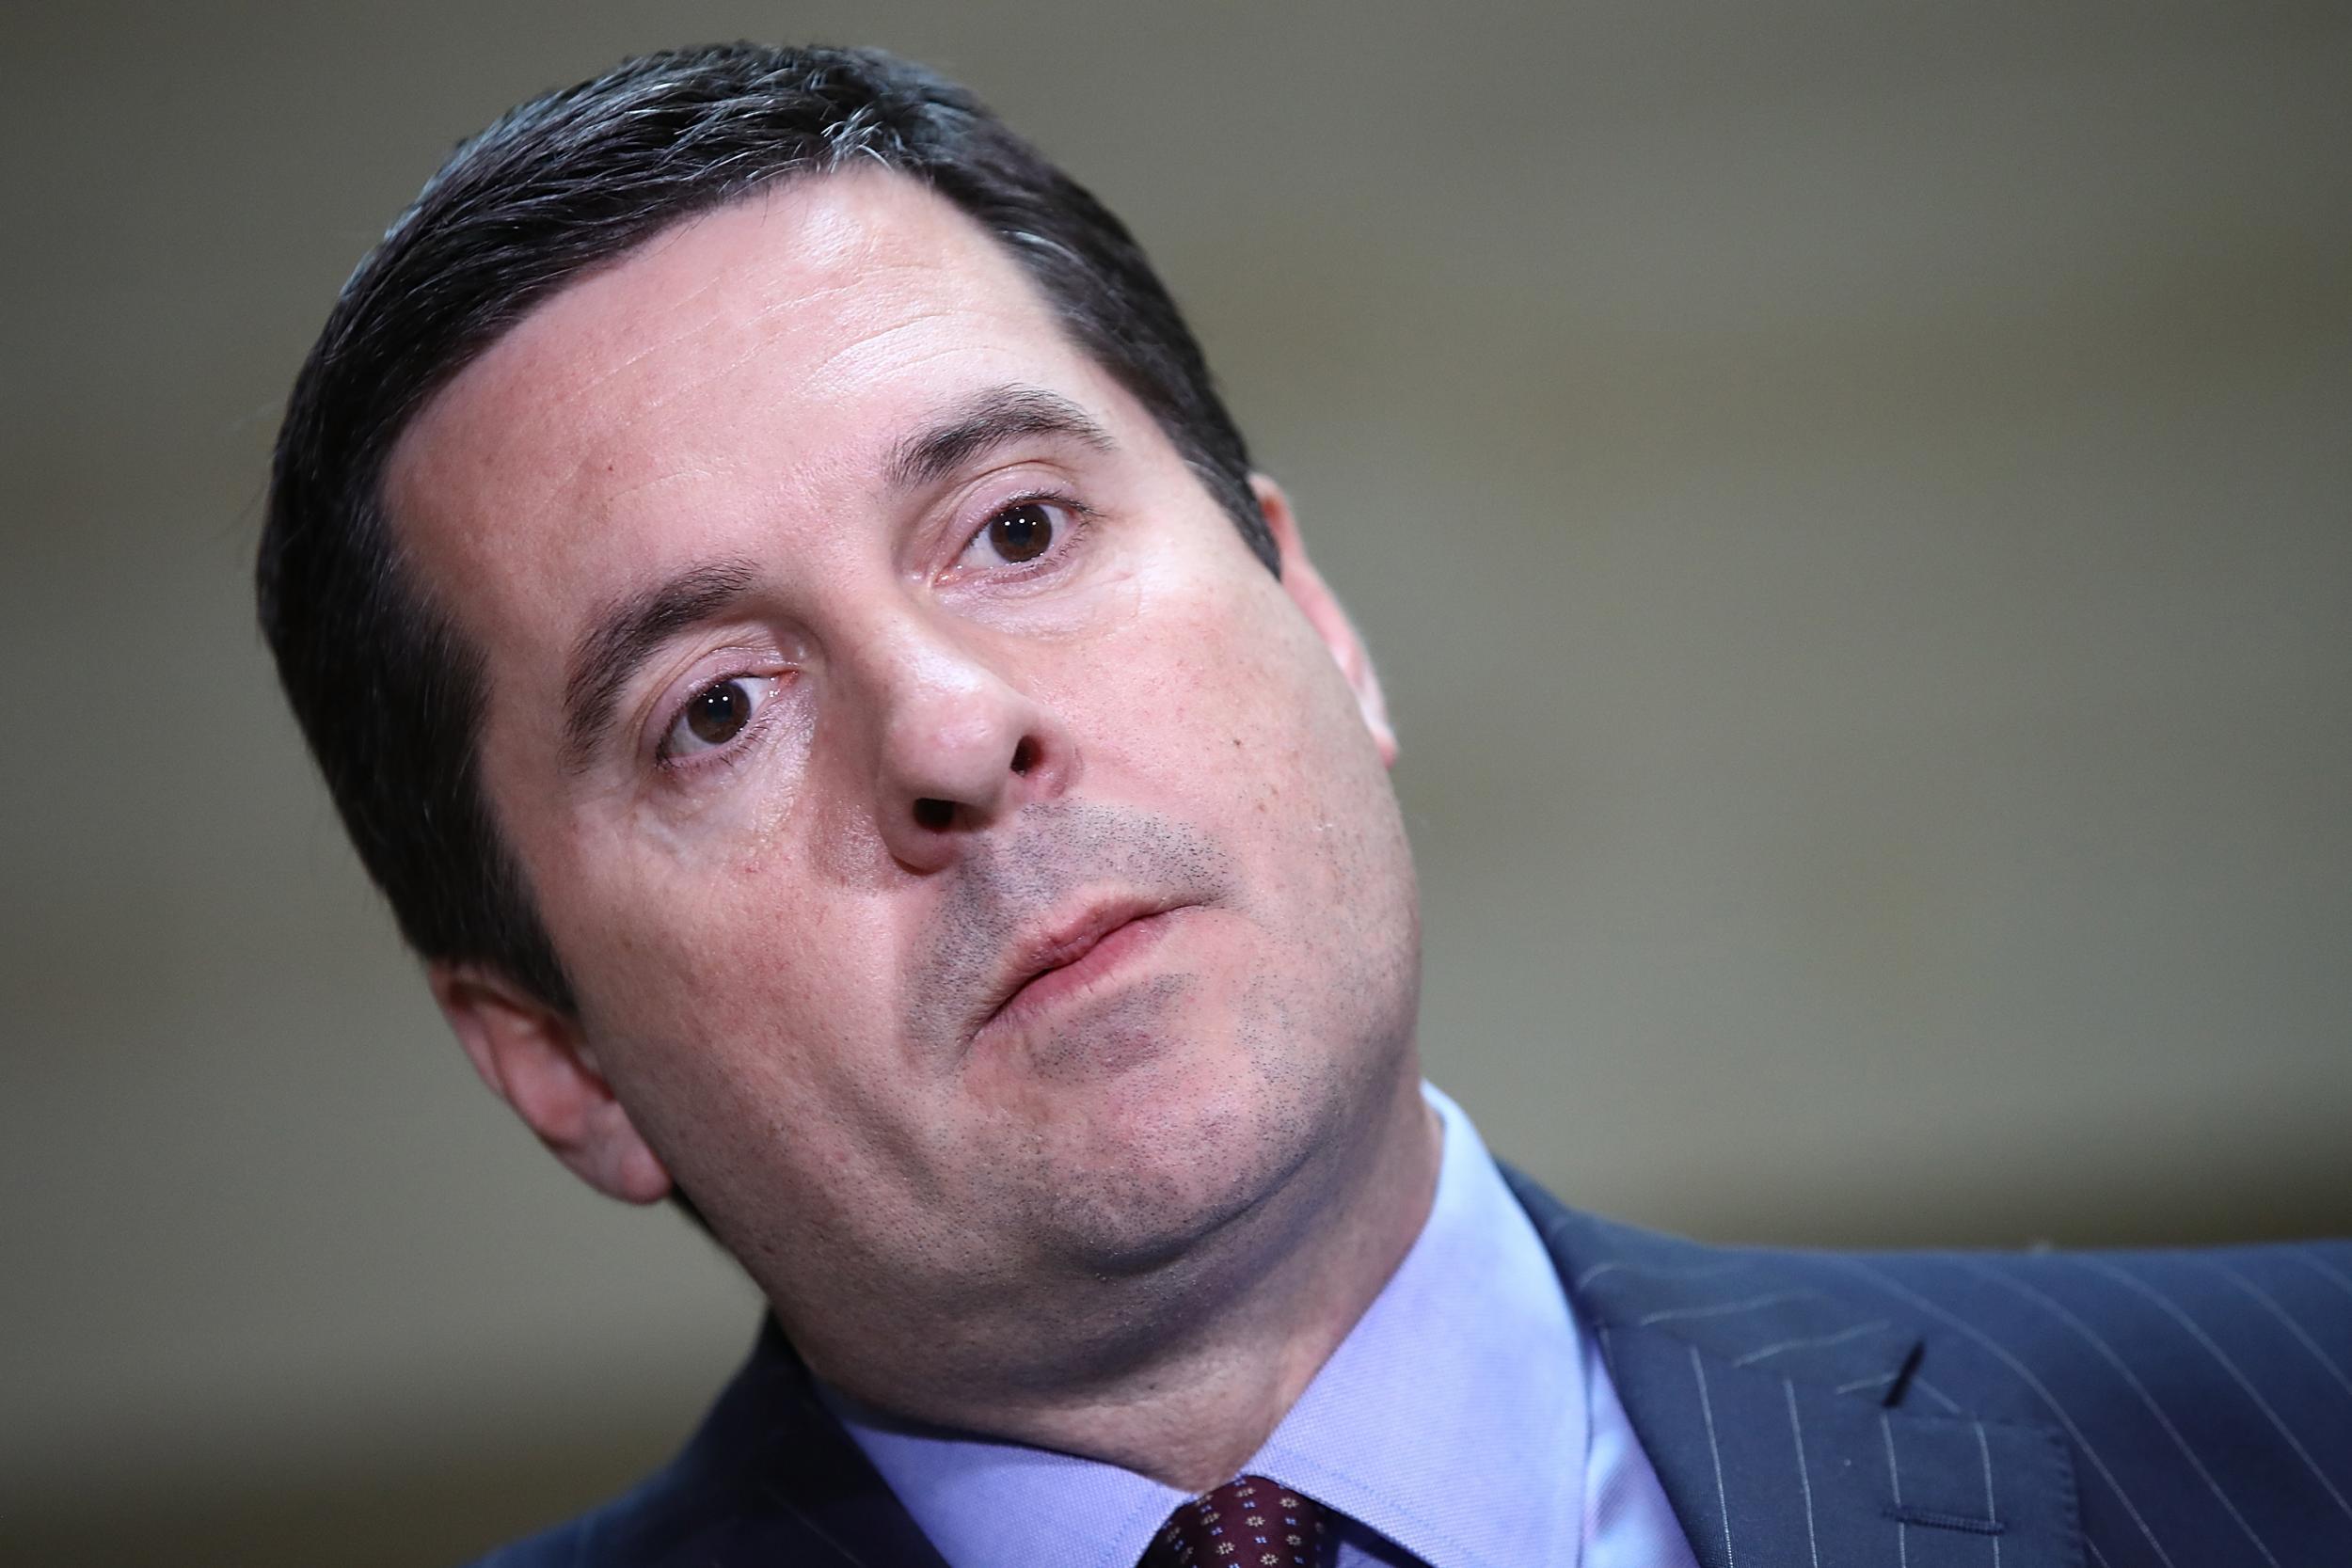 House intelligence chairman Devin Nunes said he believed the surveillance to be legally collected